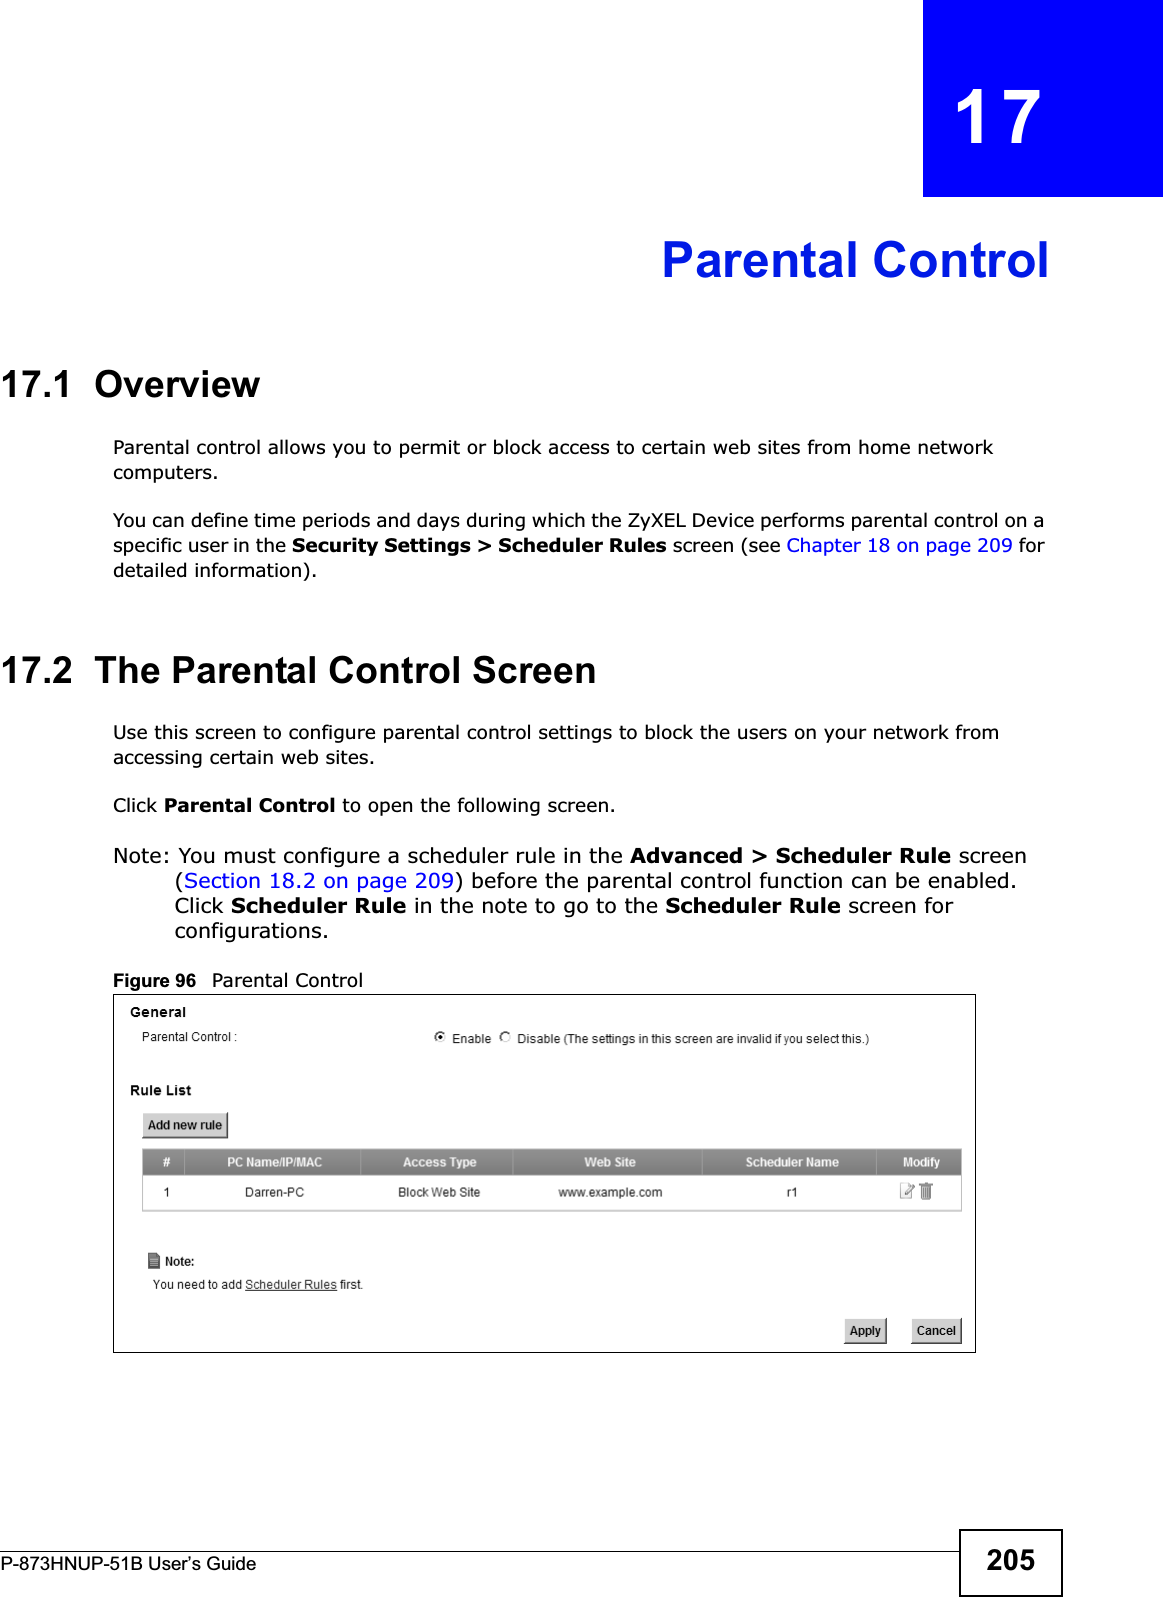 P-873HNUP-51B User’s Guide 205CHAPTER   17Parental Control17.1  OverviewParental control allows you to permit or block access to certain web sites from home network computers.You can define time periods and days during which the ZyXEL Device performs parental control on a specific user in the Security Settings &gt; Scheduler Rules screen (see Chapter 18 on page 209 for detailed information). 17.2  The Parental Control ScreenUse this screen to configure parental control settings to block the users on your network from accessing certain web sites.Click Parental Control to open the following screen. Note: You must configure a scheduler rule in the Advanced &gt; Scheduler Rule screen (Section 18.2 on page 209) before the parental control function can be enabled. Click Scheduler Rule in the note to go to the Scheduler Rule screen for configurations. Figure 96   Parental Control  